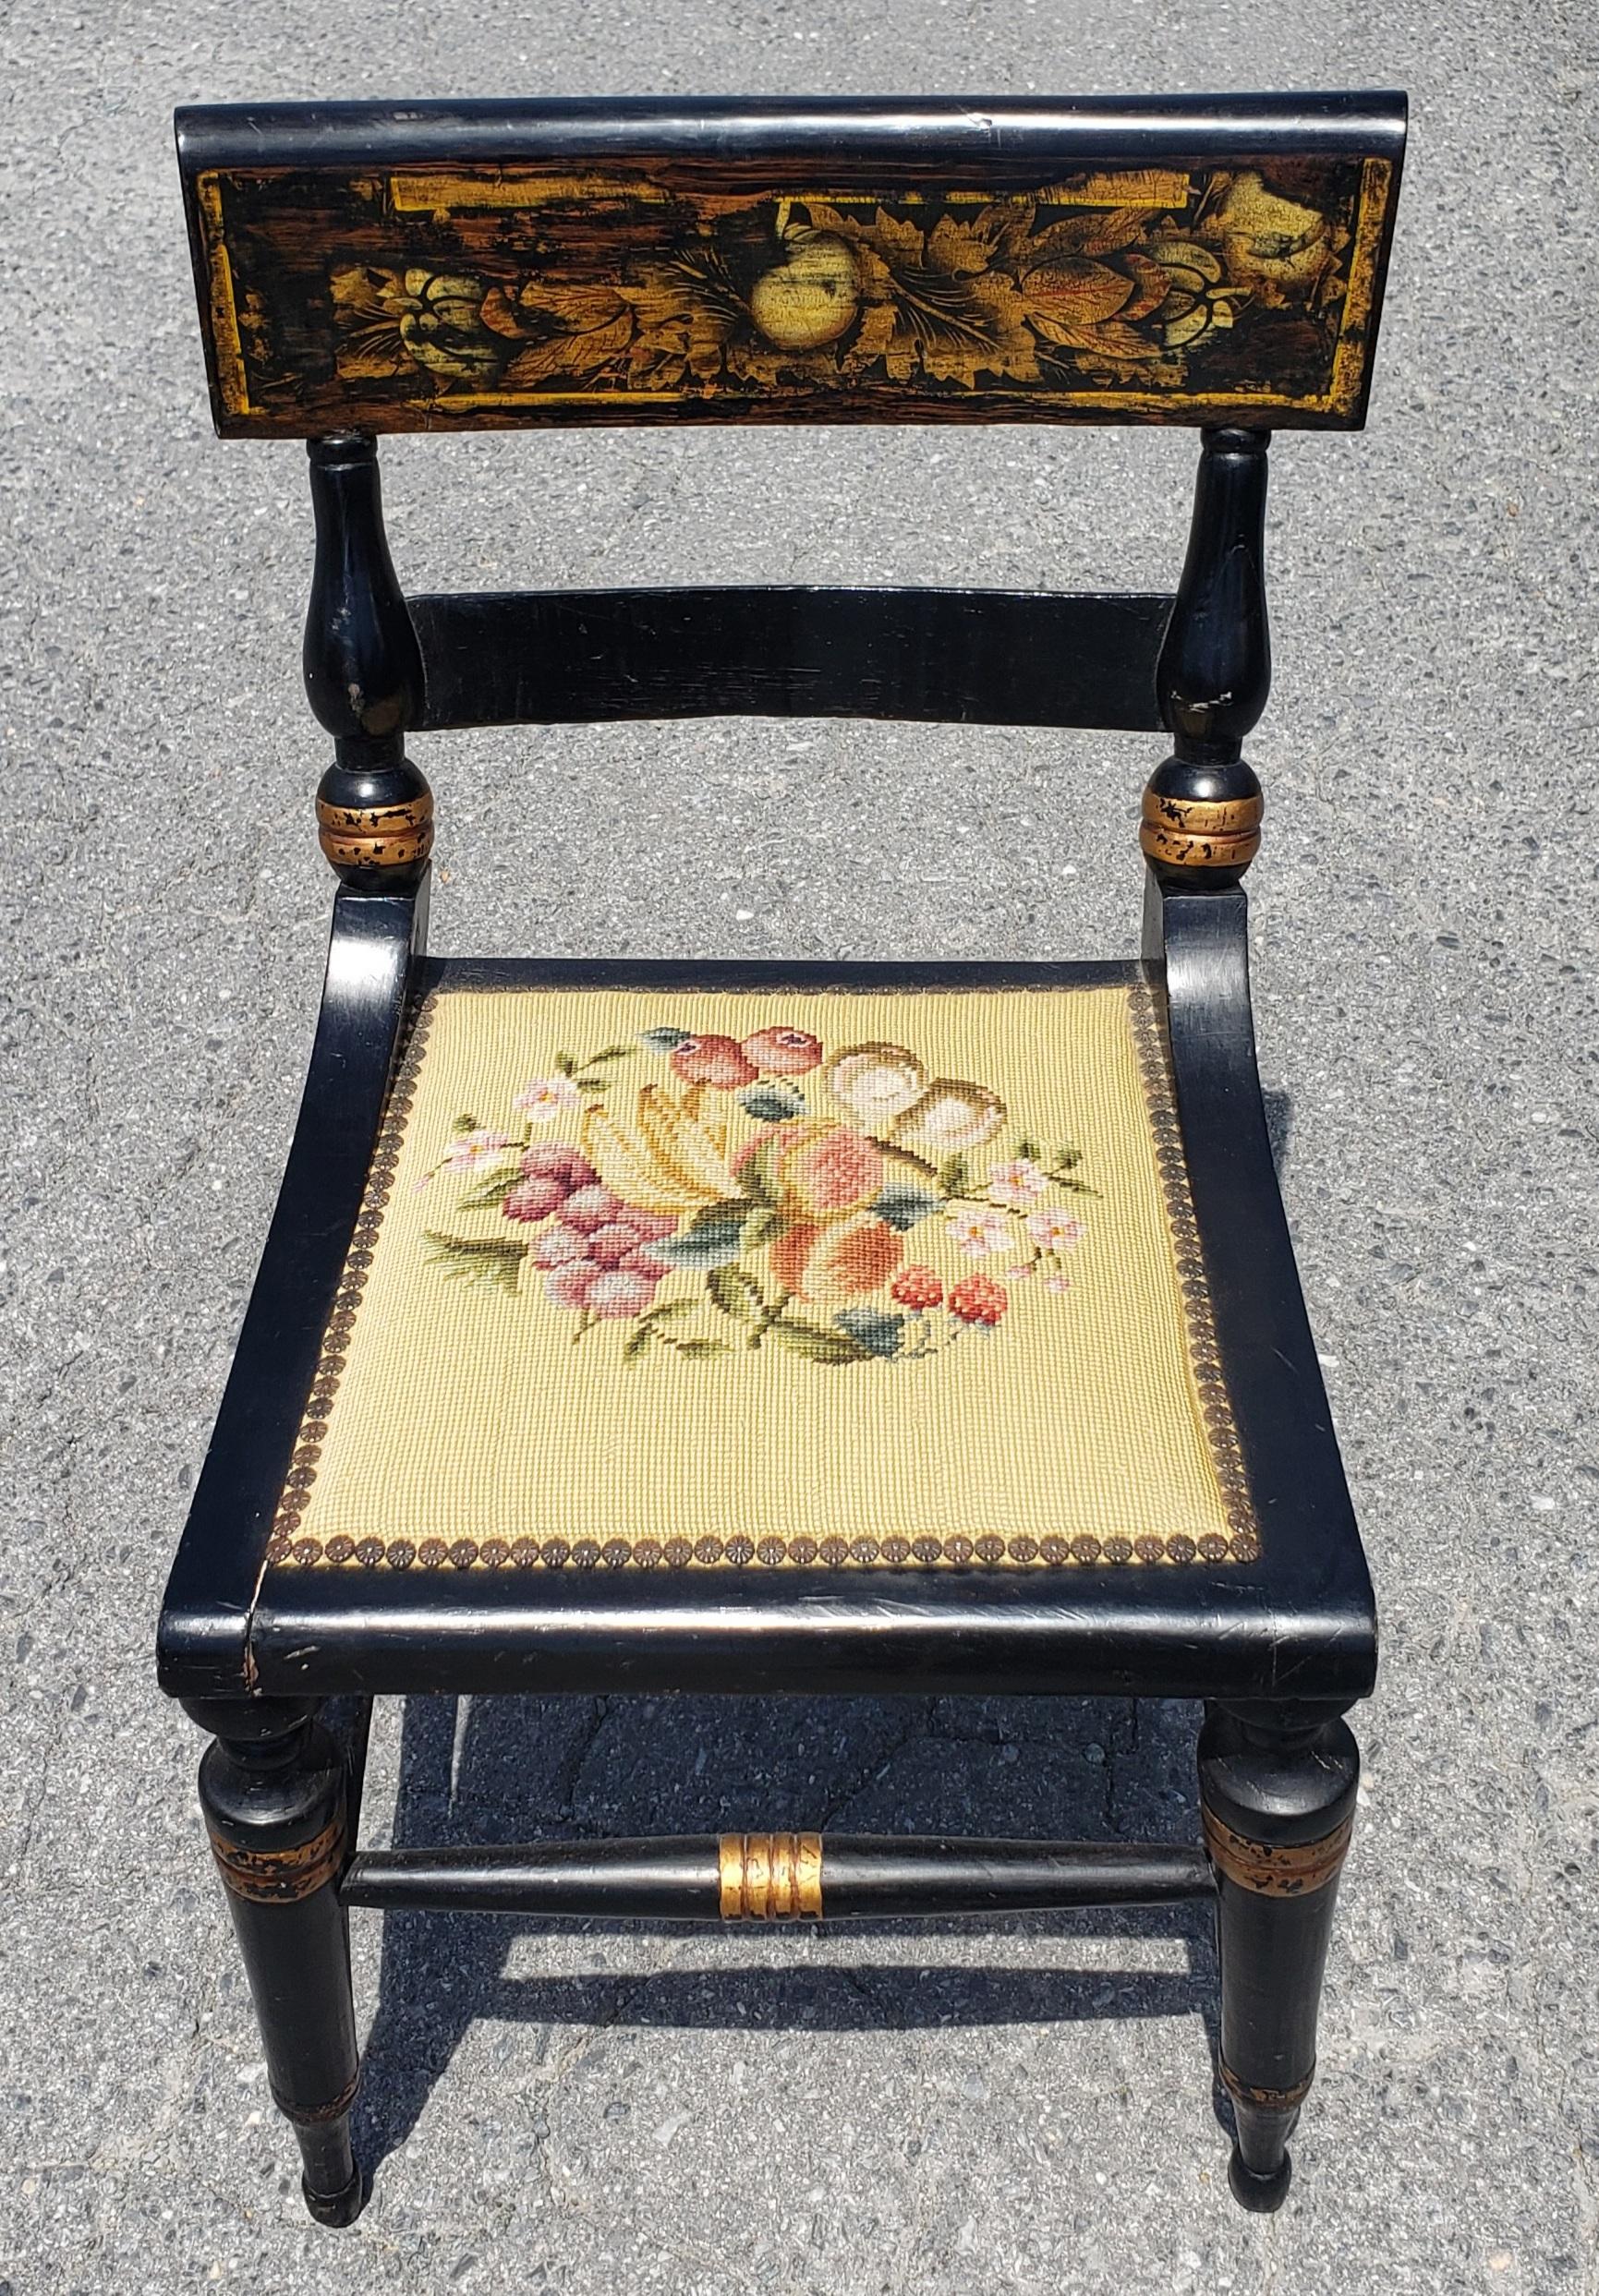 A charming Early American style Stencil Decorated, Parcel Gilt and Ebonized Side Chair with clean Needlepoint  work upholstered seat. Measure 19